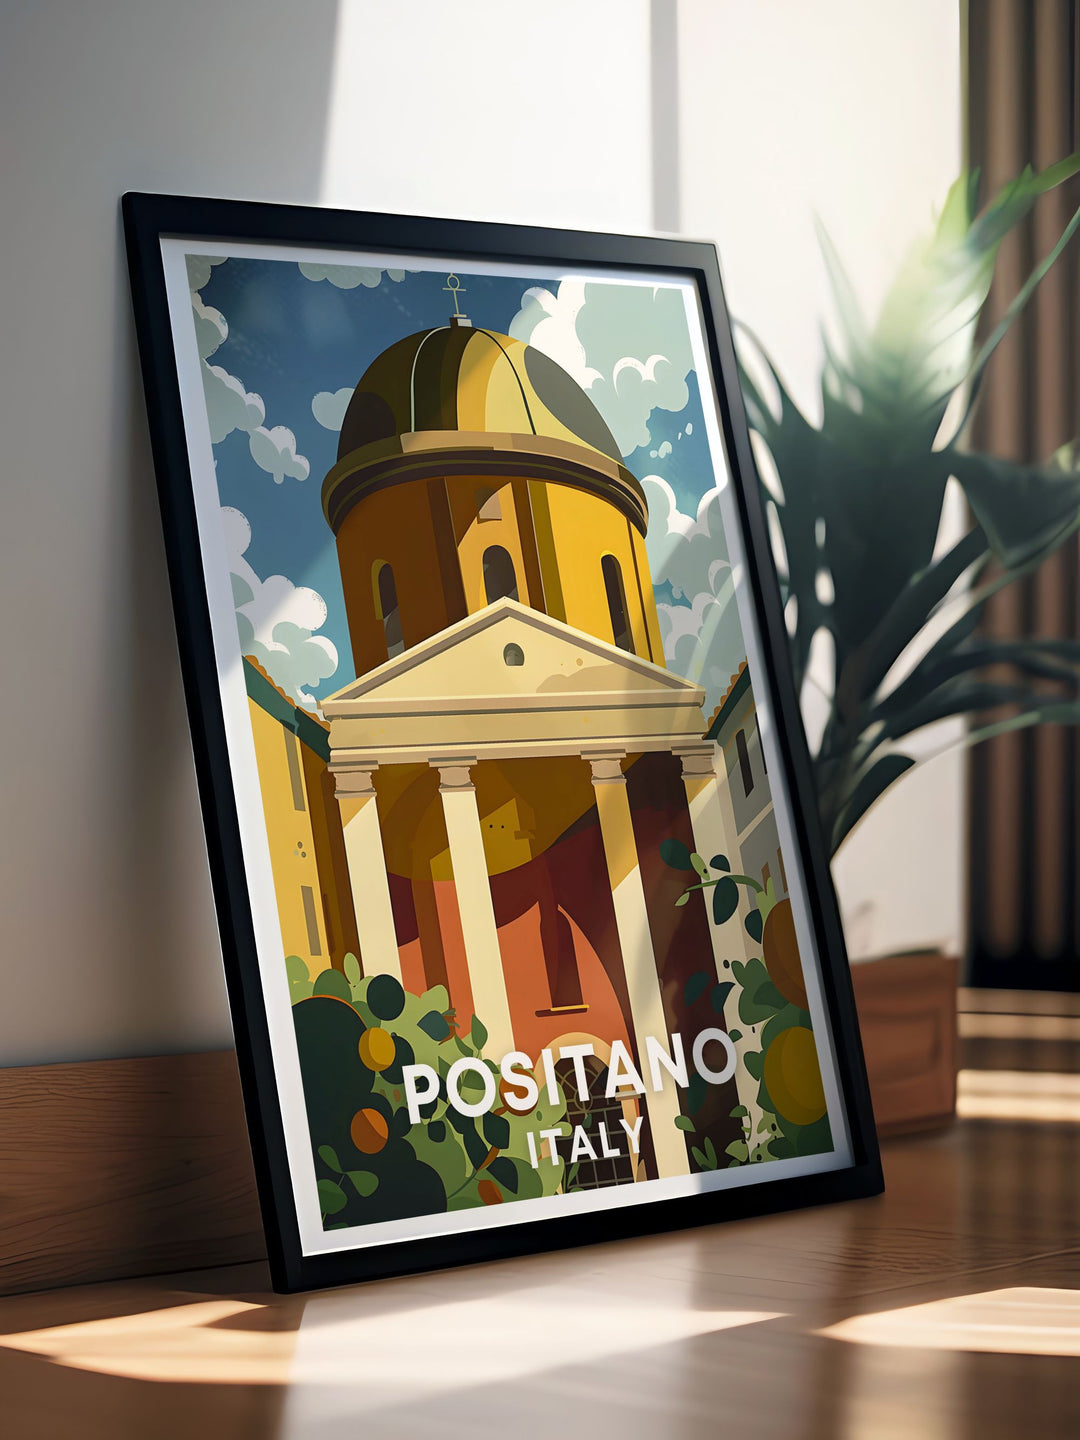 Beautiful Spiaggia Grande Prints featuring the Chiesa di Santa Maria Assunta in Positano perfect for home decor adding a touch of Mediterranean charm to any room vibrant colors and intricate details bring the Amalfi Coast to life